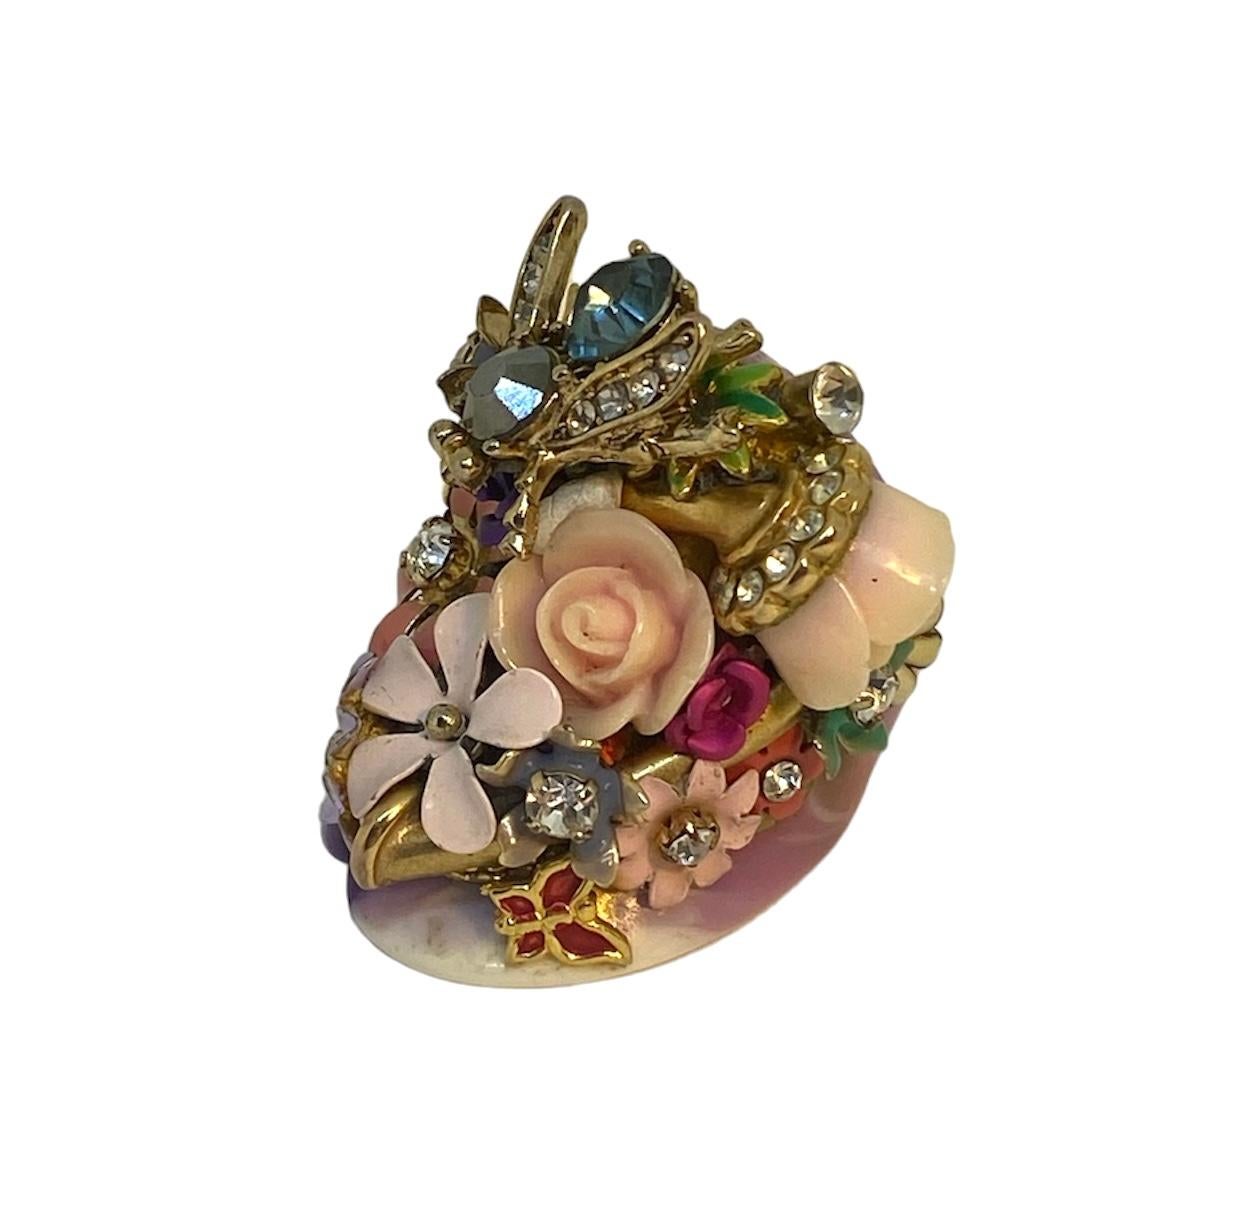 Women's One Off Ring. Handmade & High Upcycling. Bronze, Resin & Vintage Elements. 20mm. For Sale